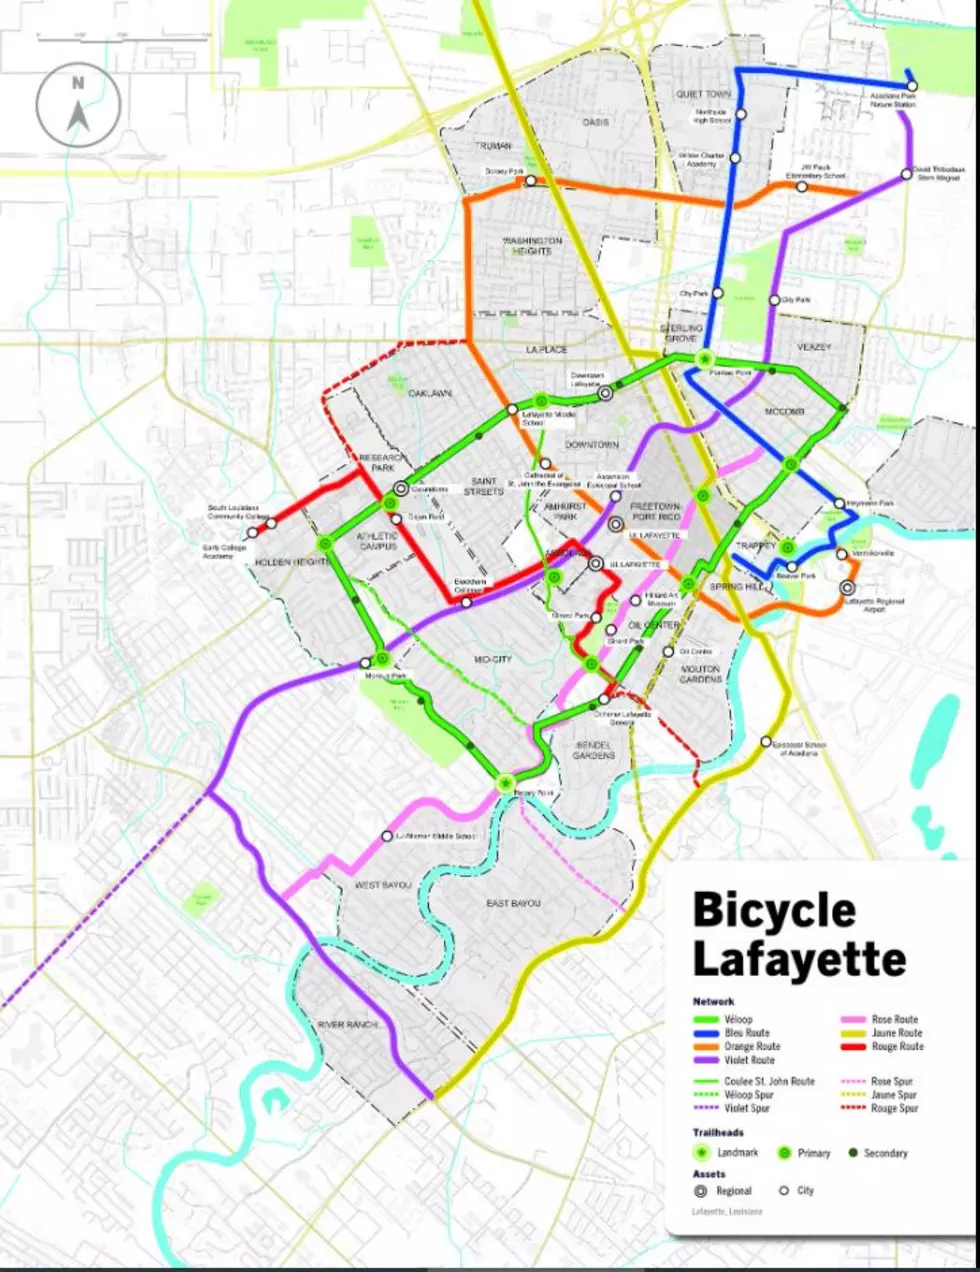 Proposed Bicycle Paths for Lafayette Unveiled